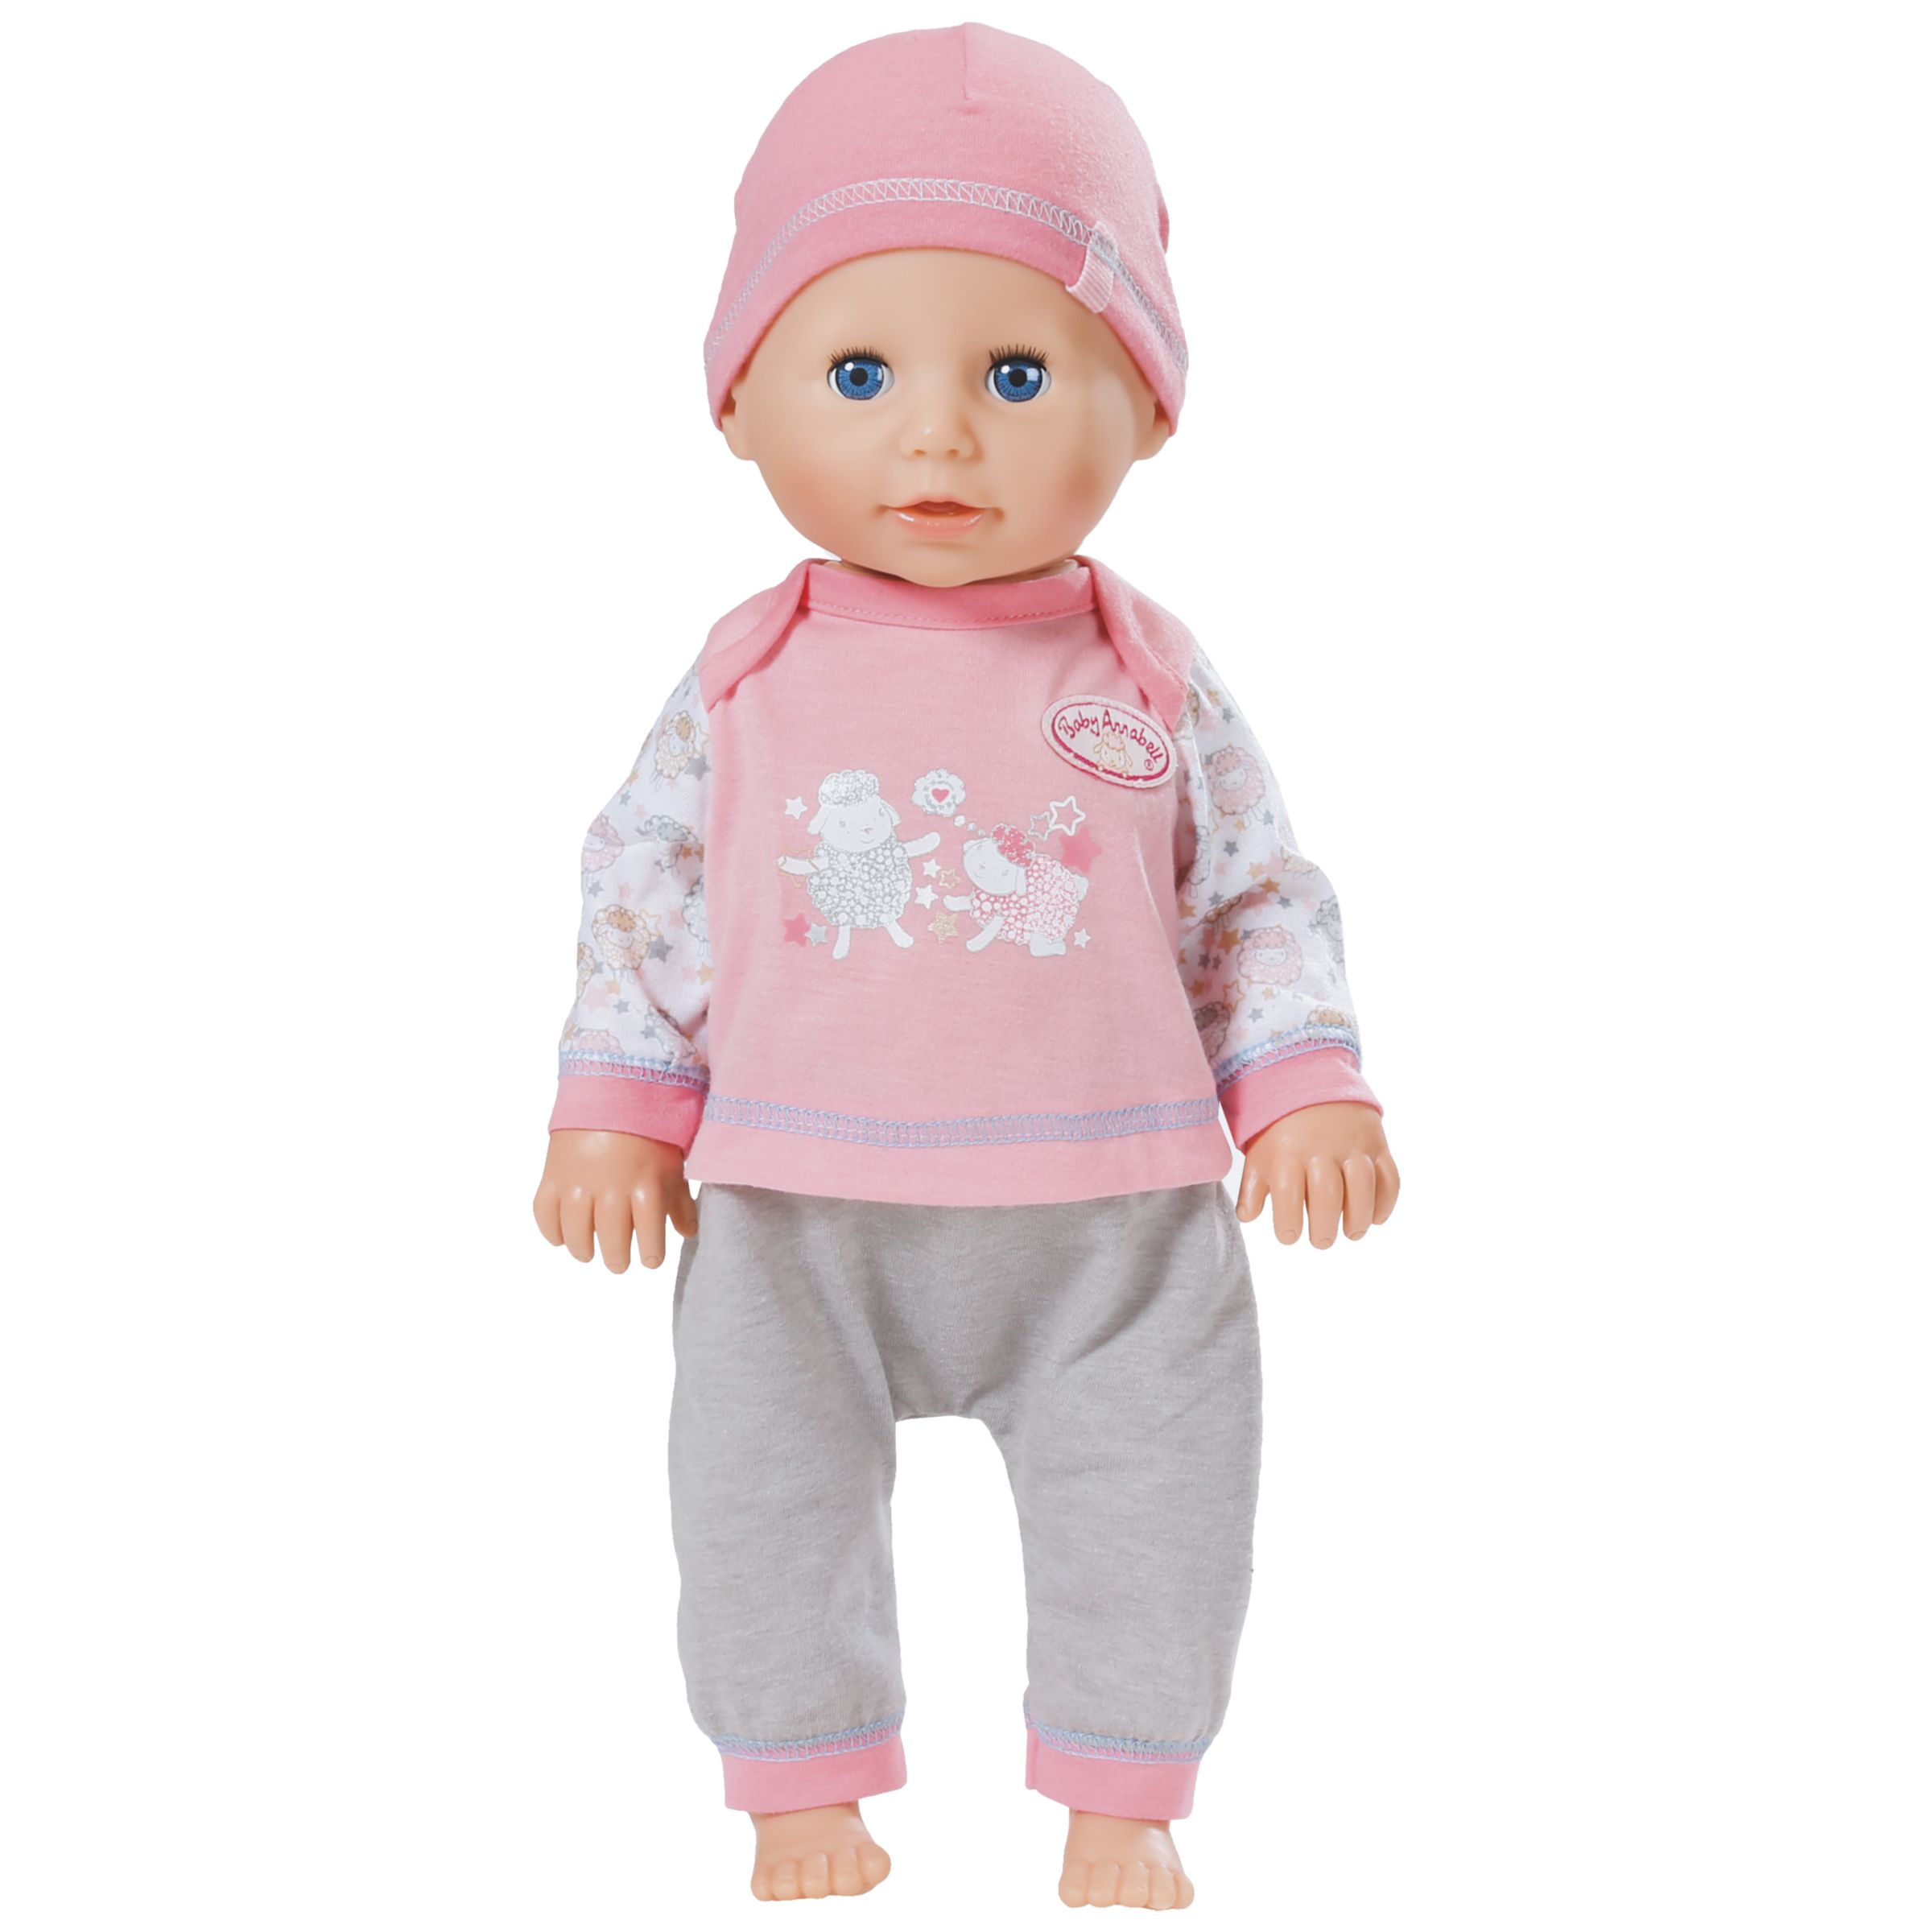 Baby Annabell Learns To Walk Doll At John Lewis Partners